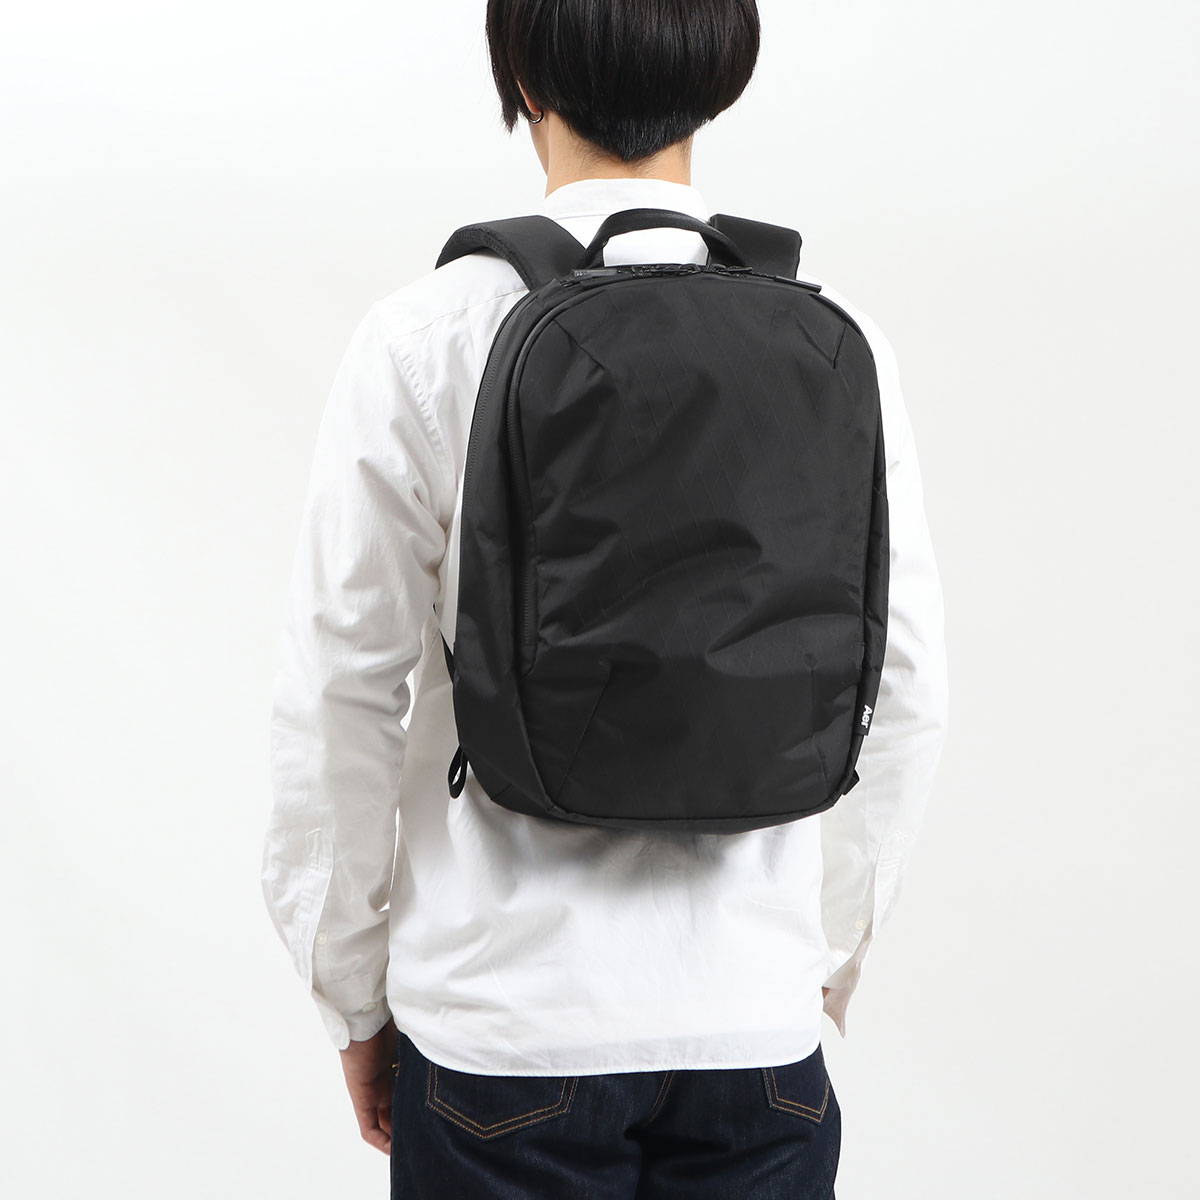 Aer エアー Day Pack 231009 14.8L リュッ ク